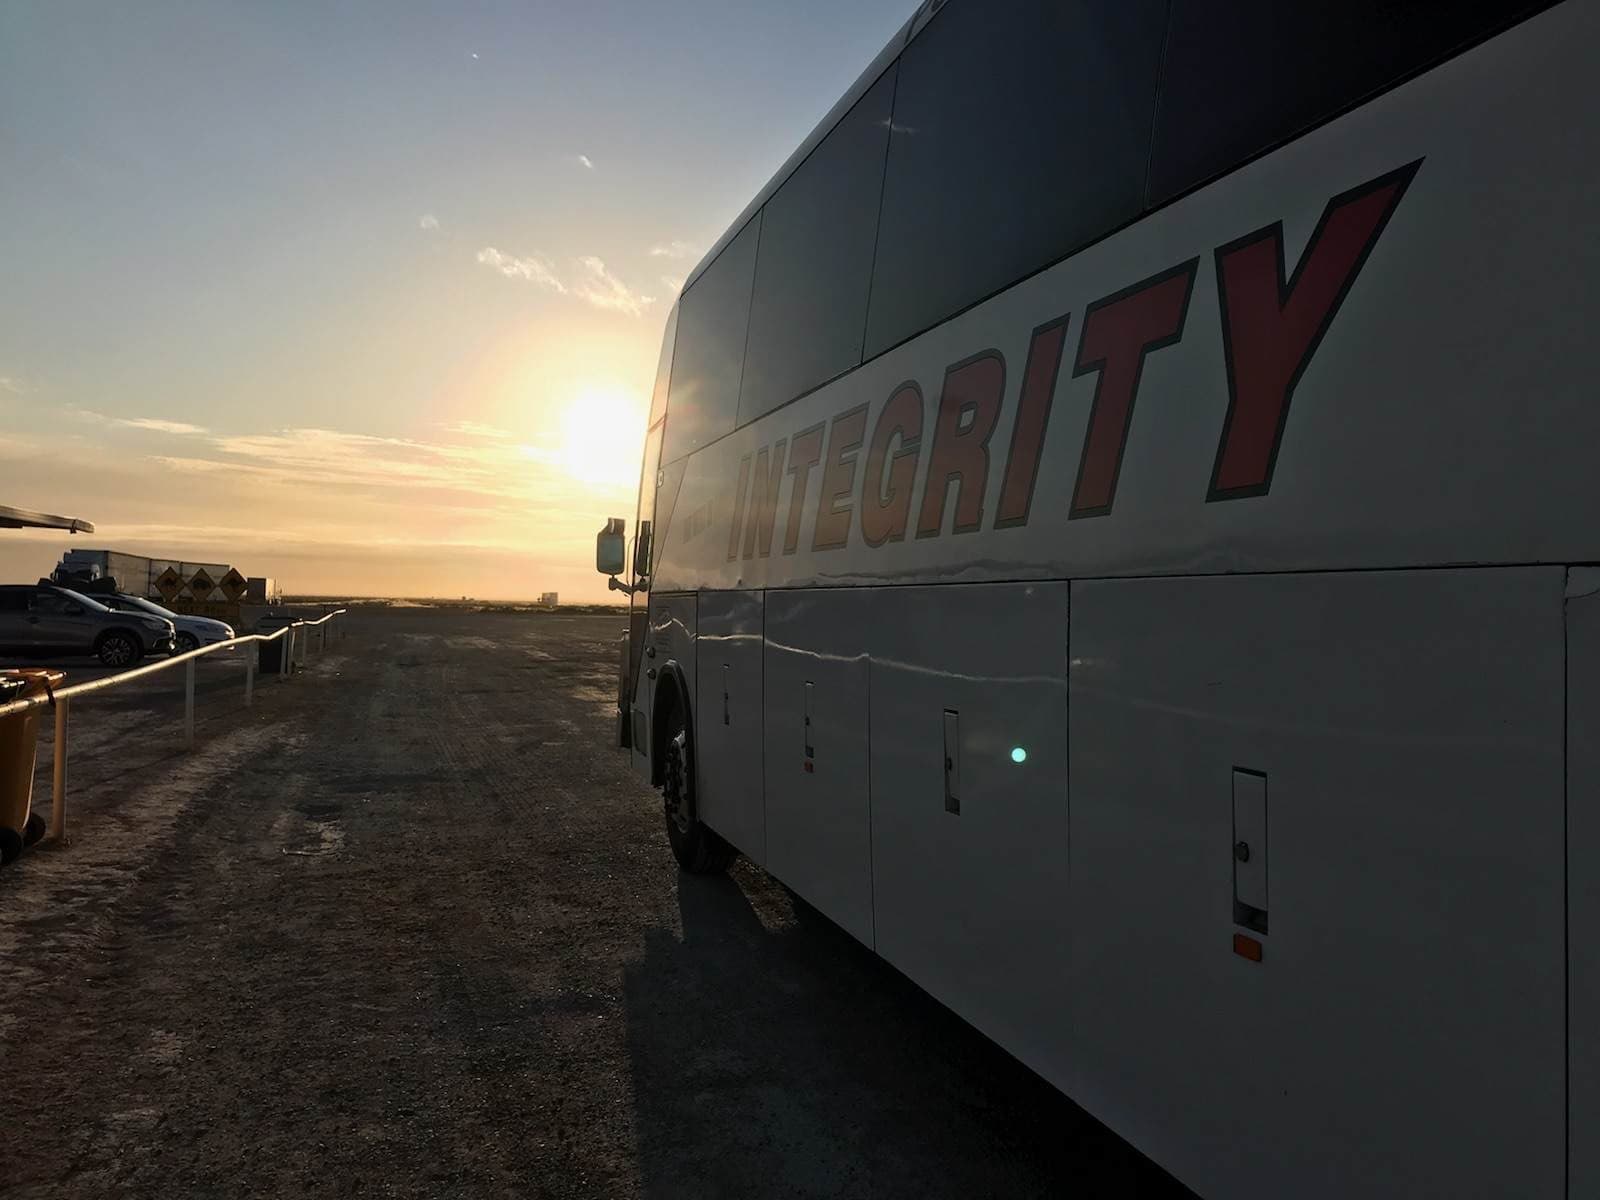 Travelling with Integrity Coach Lines from Perth to Broome